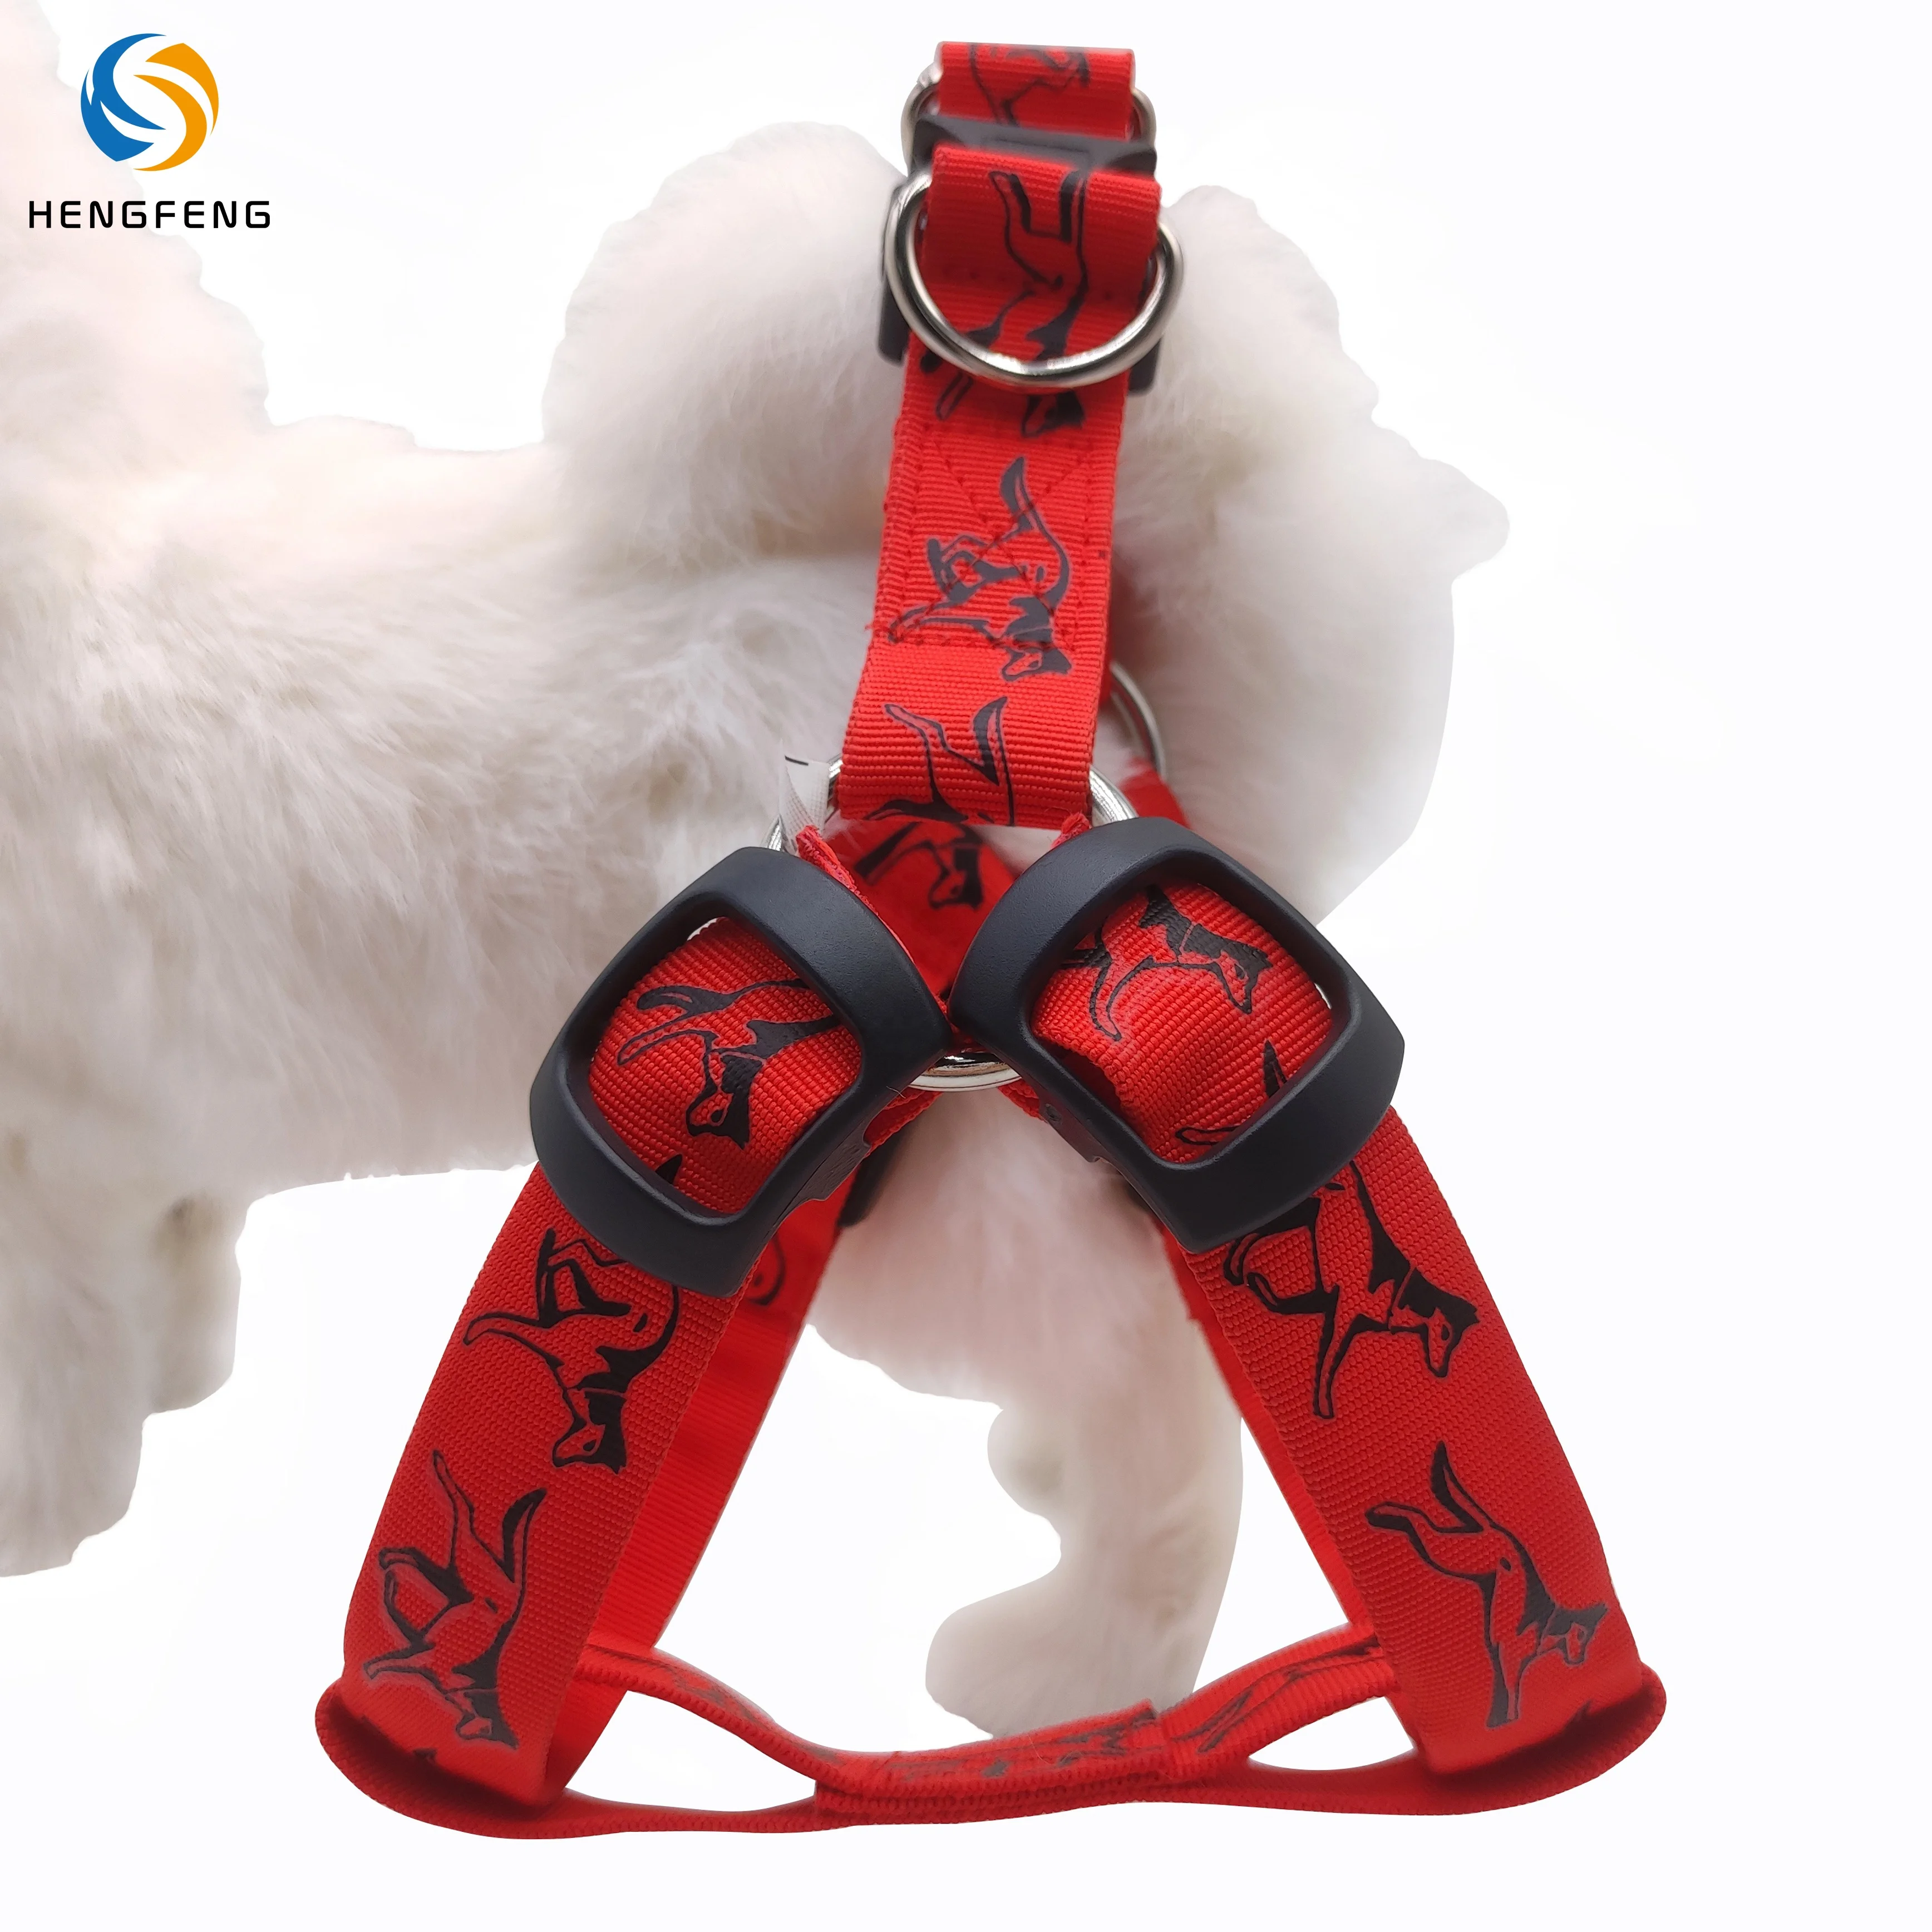 

LED Lights Dog Pets Harness Adjustable Glow In Night Pet Dog Glowing Pet Light Led Collars Flashing Glow In The Dark, Picture shows or custom